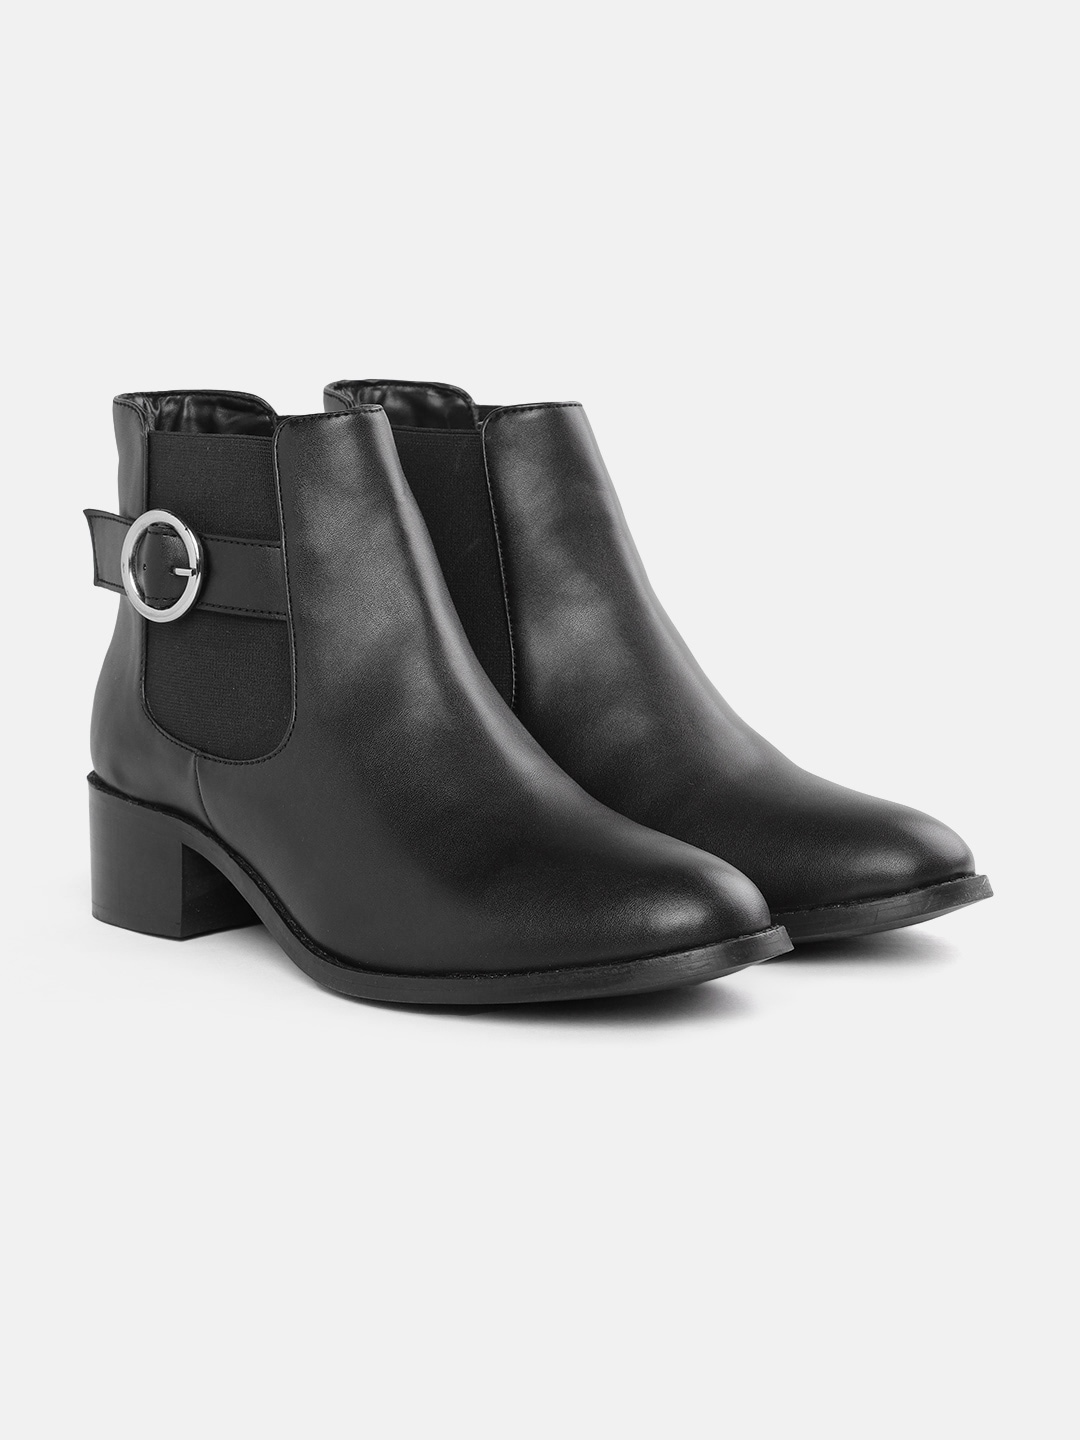 DressBerry Black Solid Block Heel Boots with Buckles Price in India